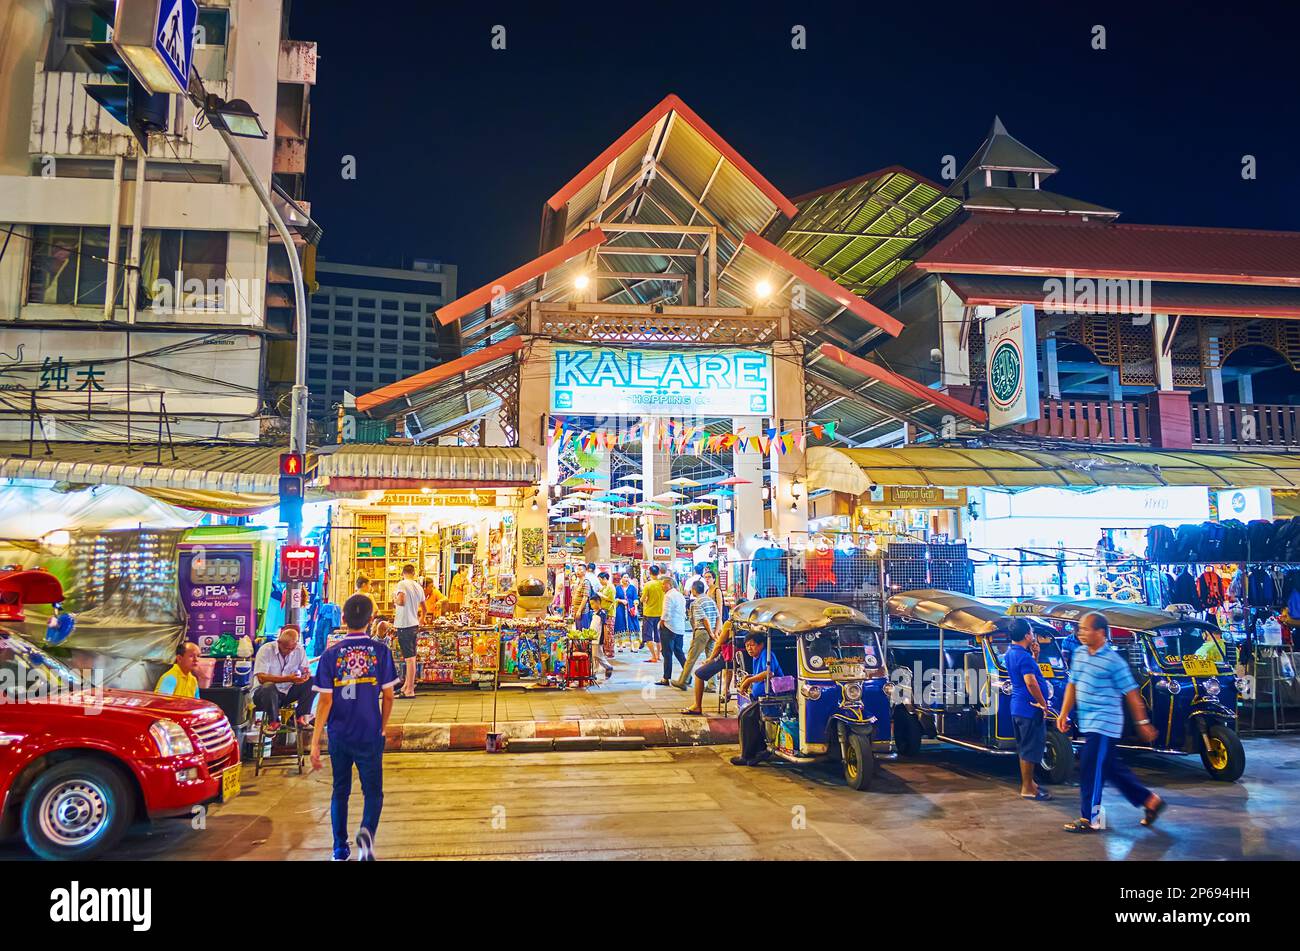 CHIANG MAI, THAILAND - MAY 3, 2019: Illuminated pavilion of Kalare Night Market stall with small stalls and parked tuk tuk taxies in the foreground, o Stock Photo